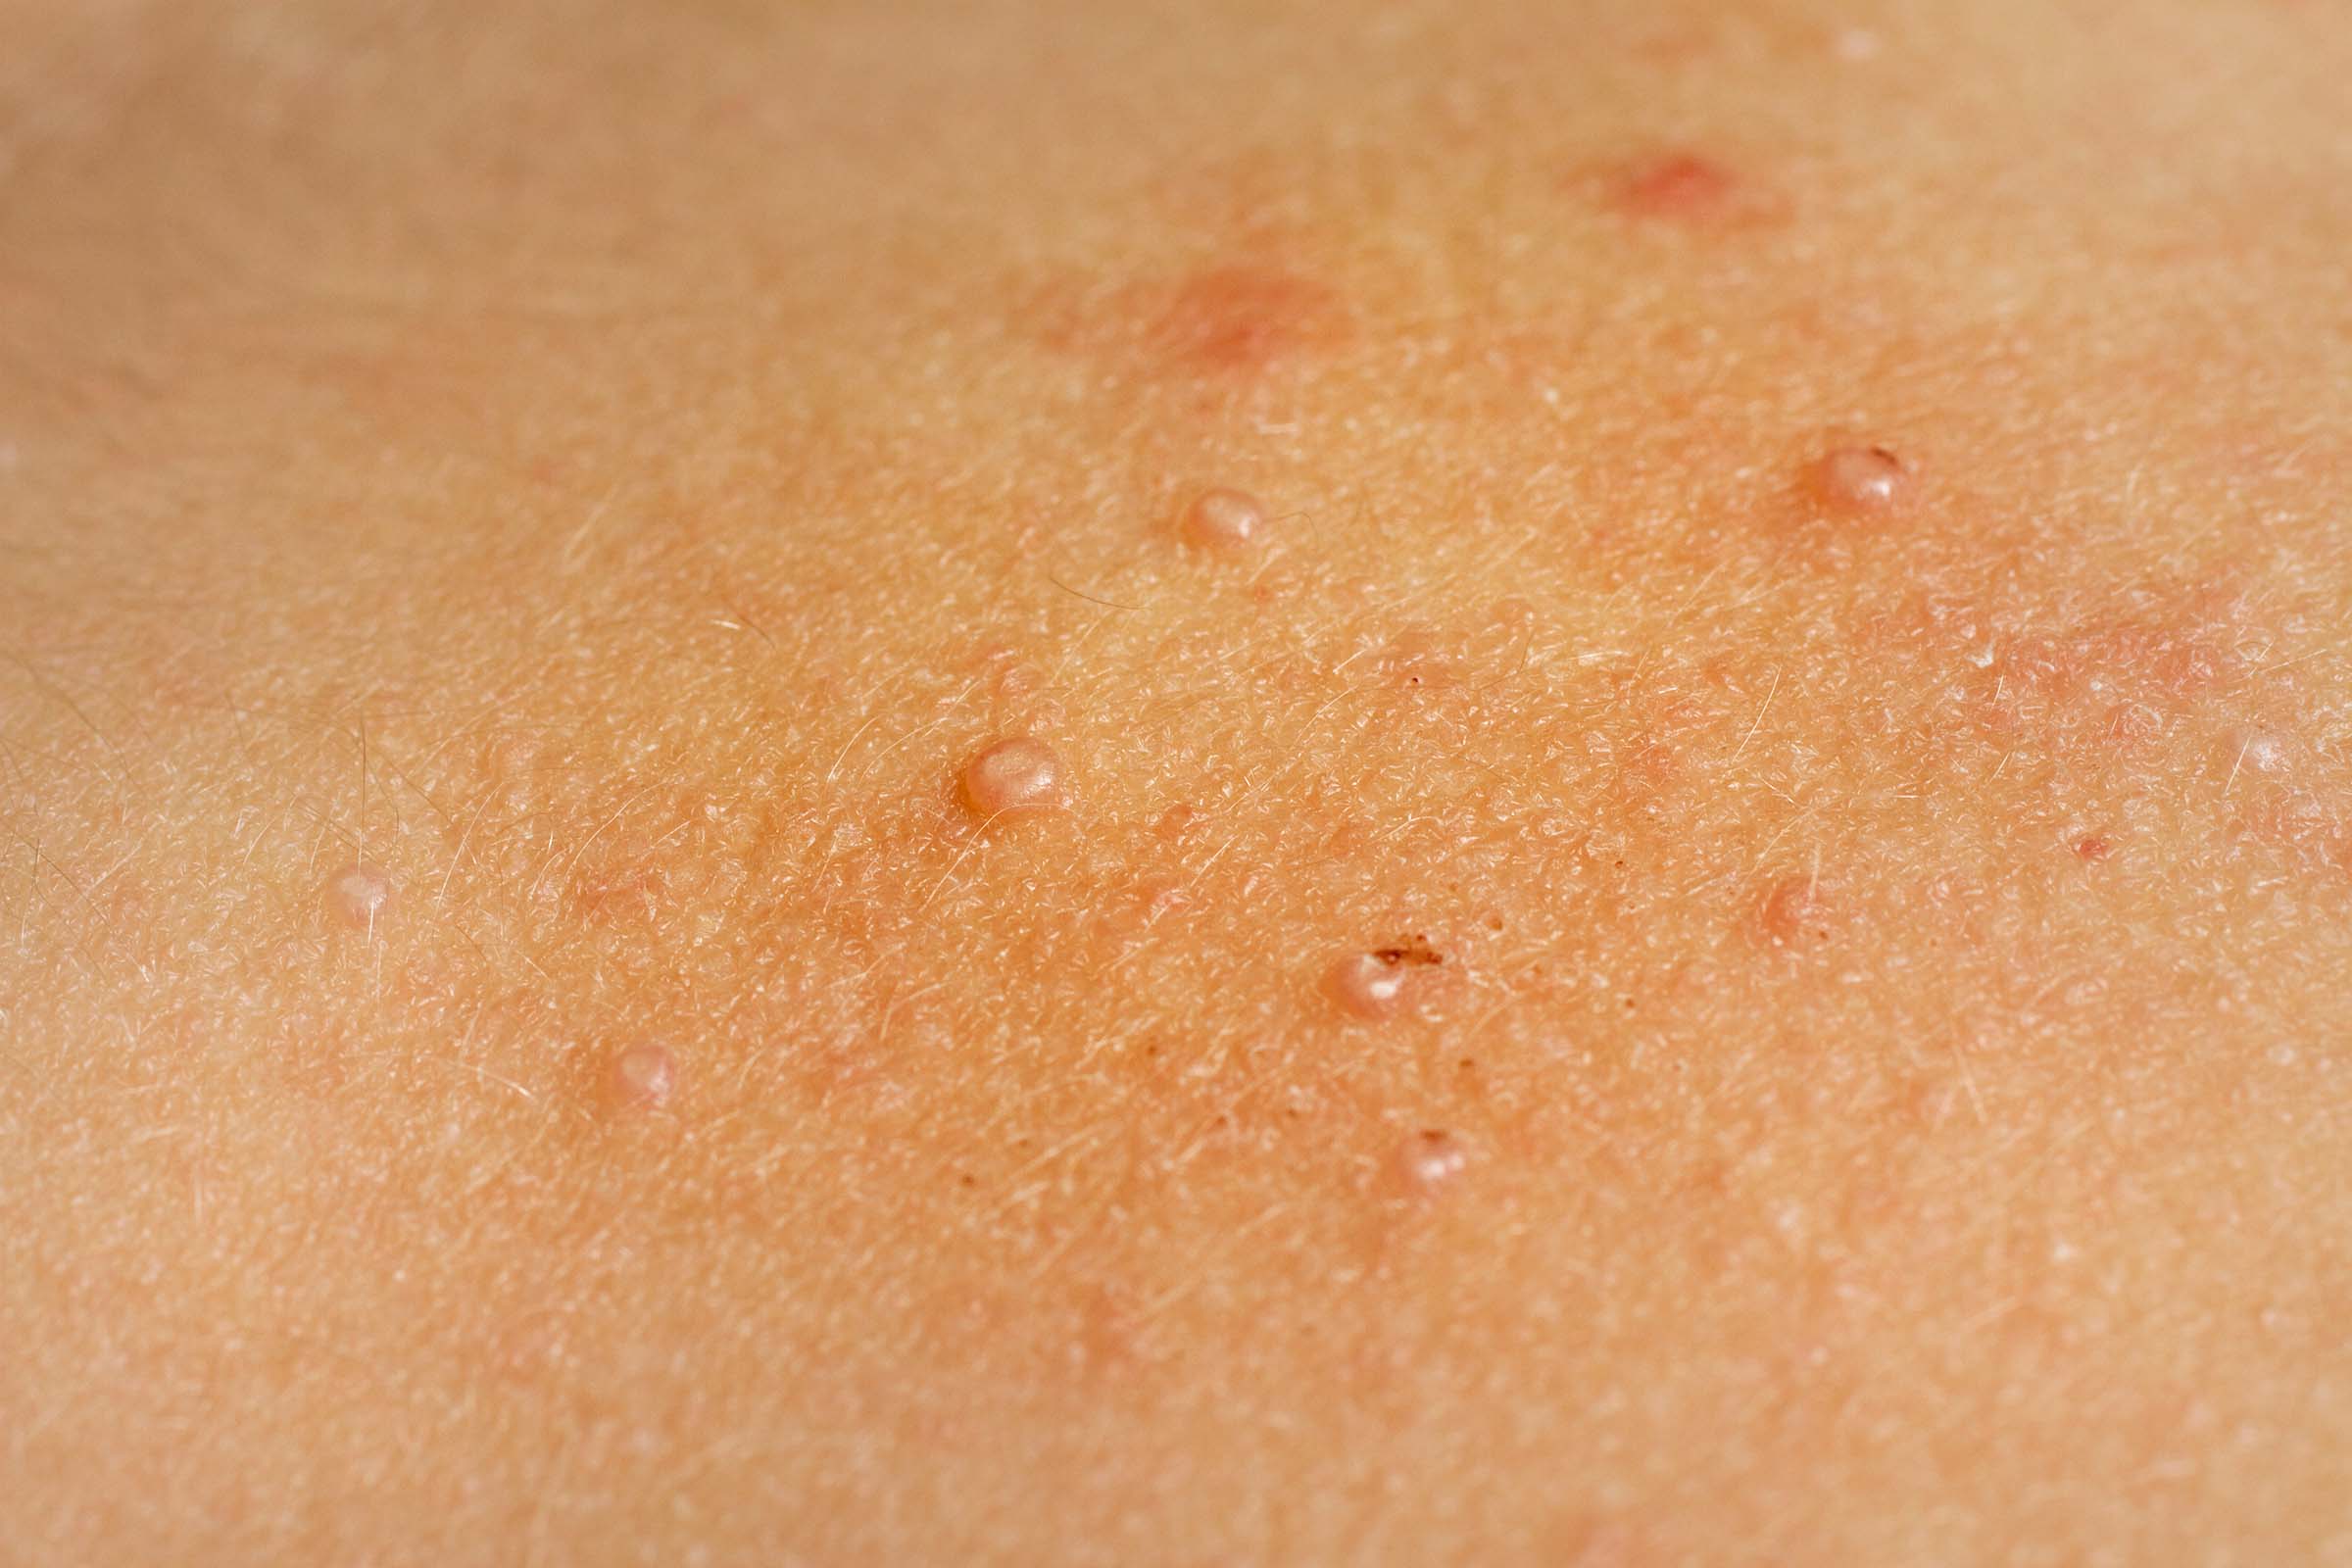 Swollen Blisters On The Skin Caused By Mosquito Bites At Thigh Stock Photo  - Download Image Now - iStock